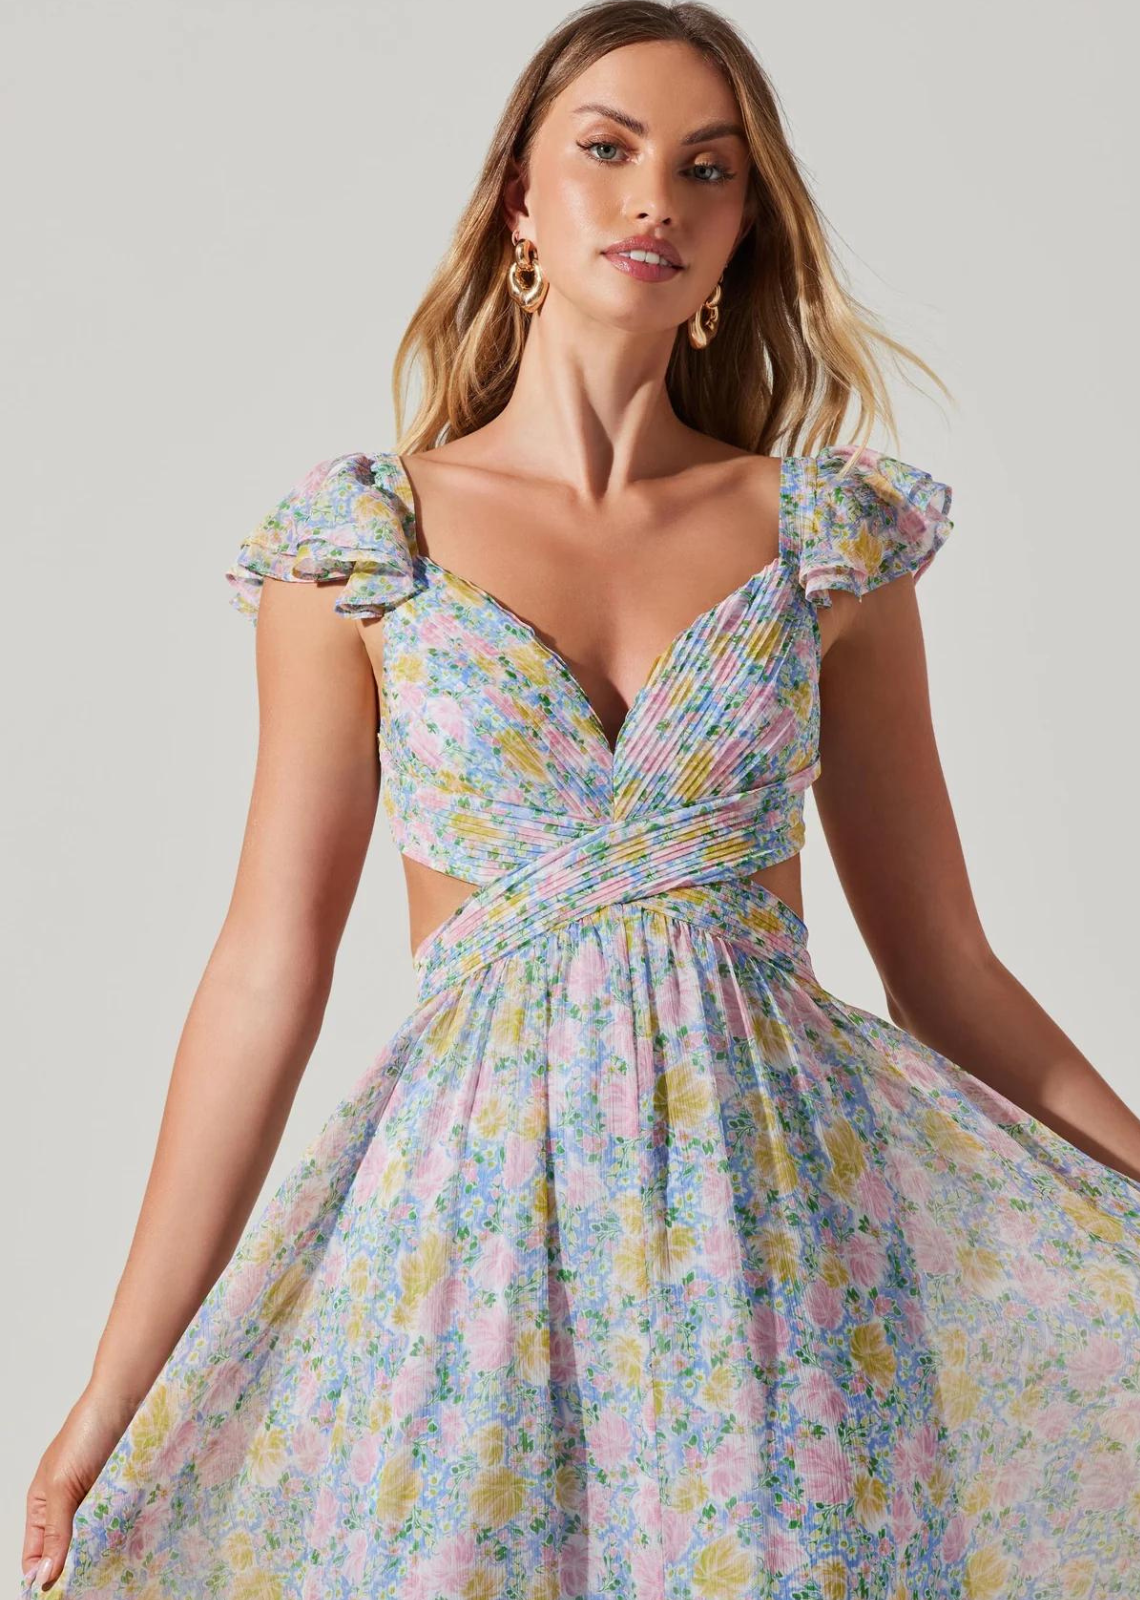 ASTR The Label Primrose Floral Maxi Dress.  Sweetheart neckline Pleated bodice Cutout accents Strappy back design Short, ruffle sleeves Concealed back zip closure